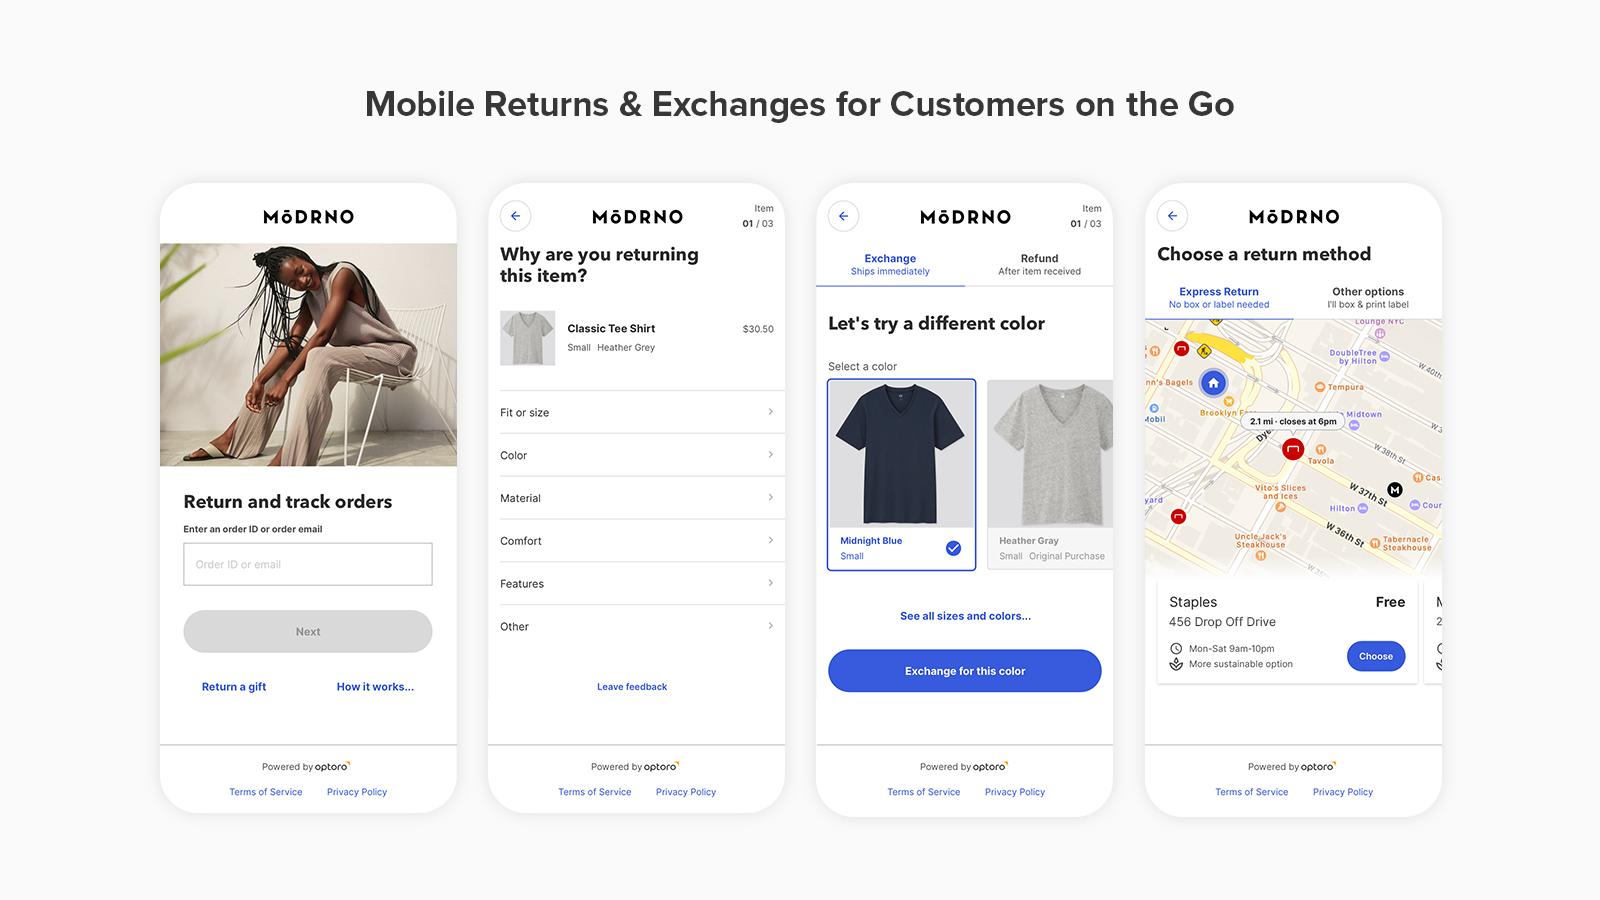 Mobile Returns & Exchanges for Customers on the Go